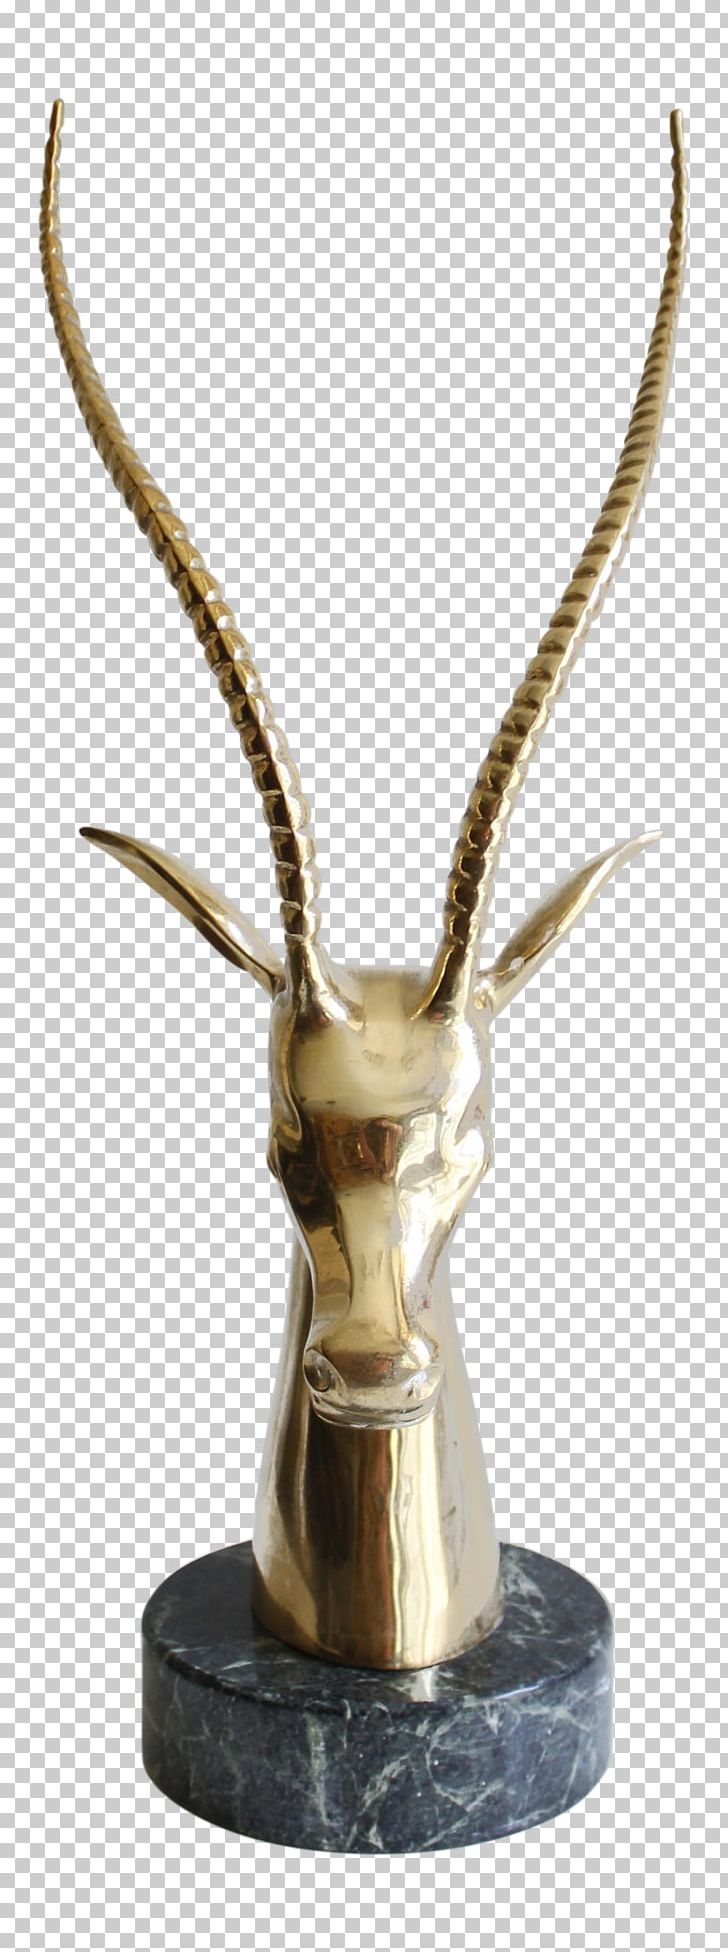 Sculpture Trophy PNG, Clipart, Antelope, Antler, Base, Brass, Green Marble Free PNG Download